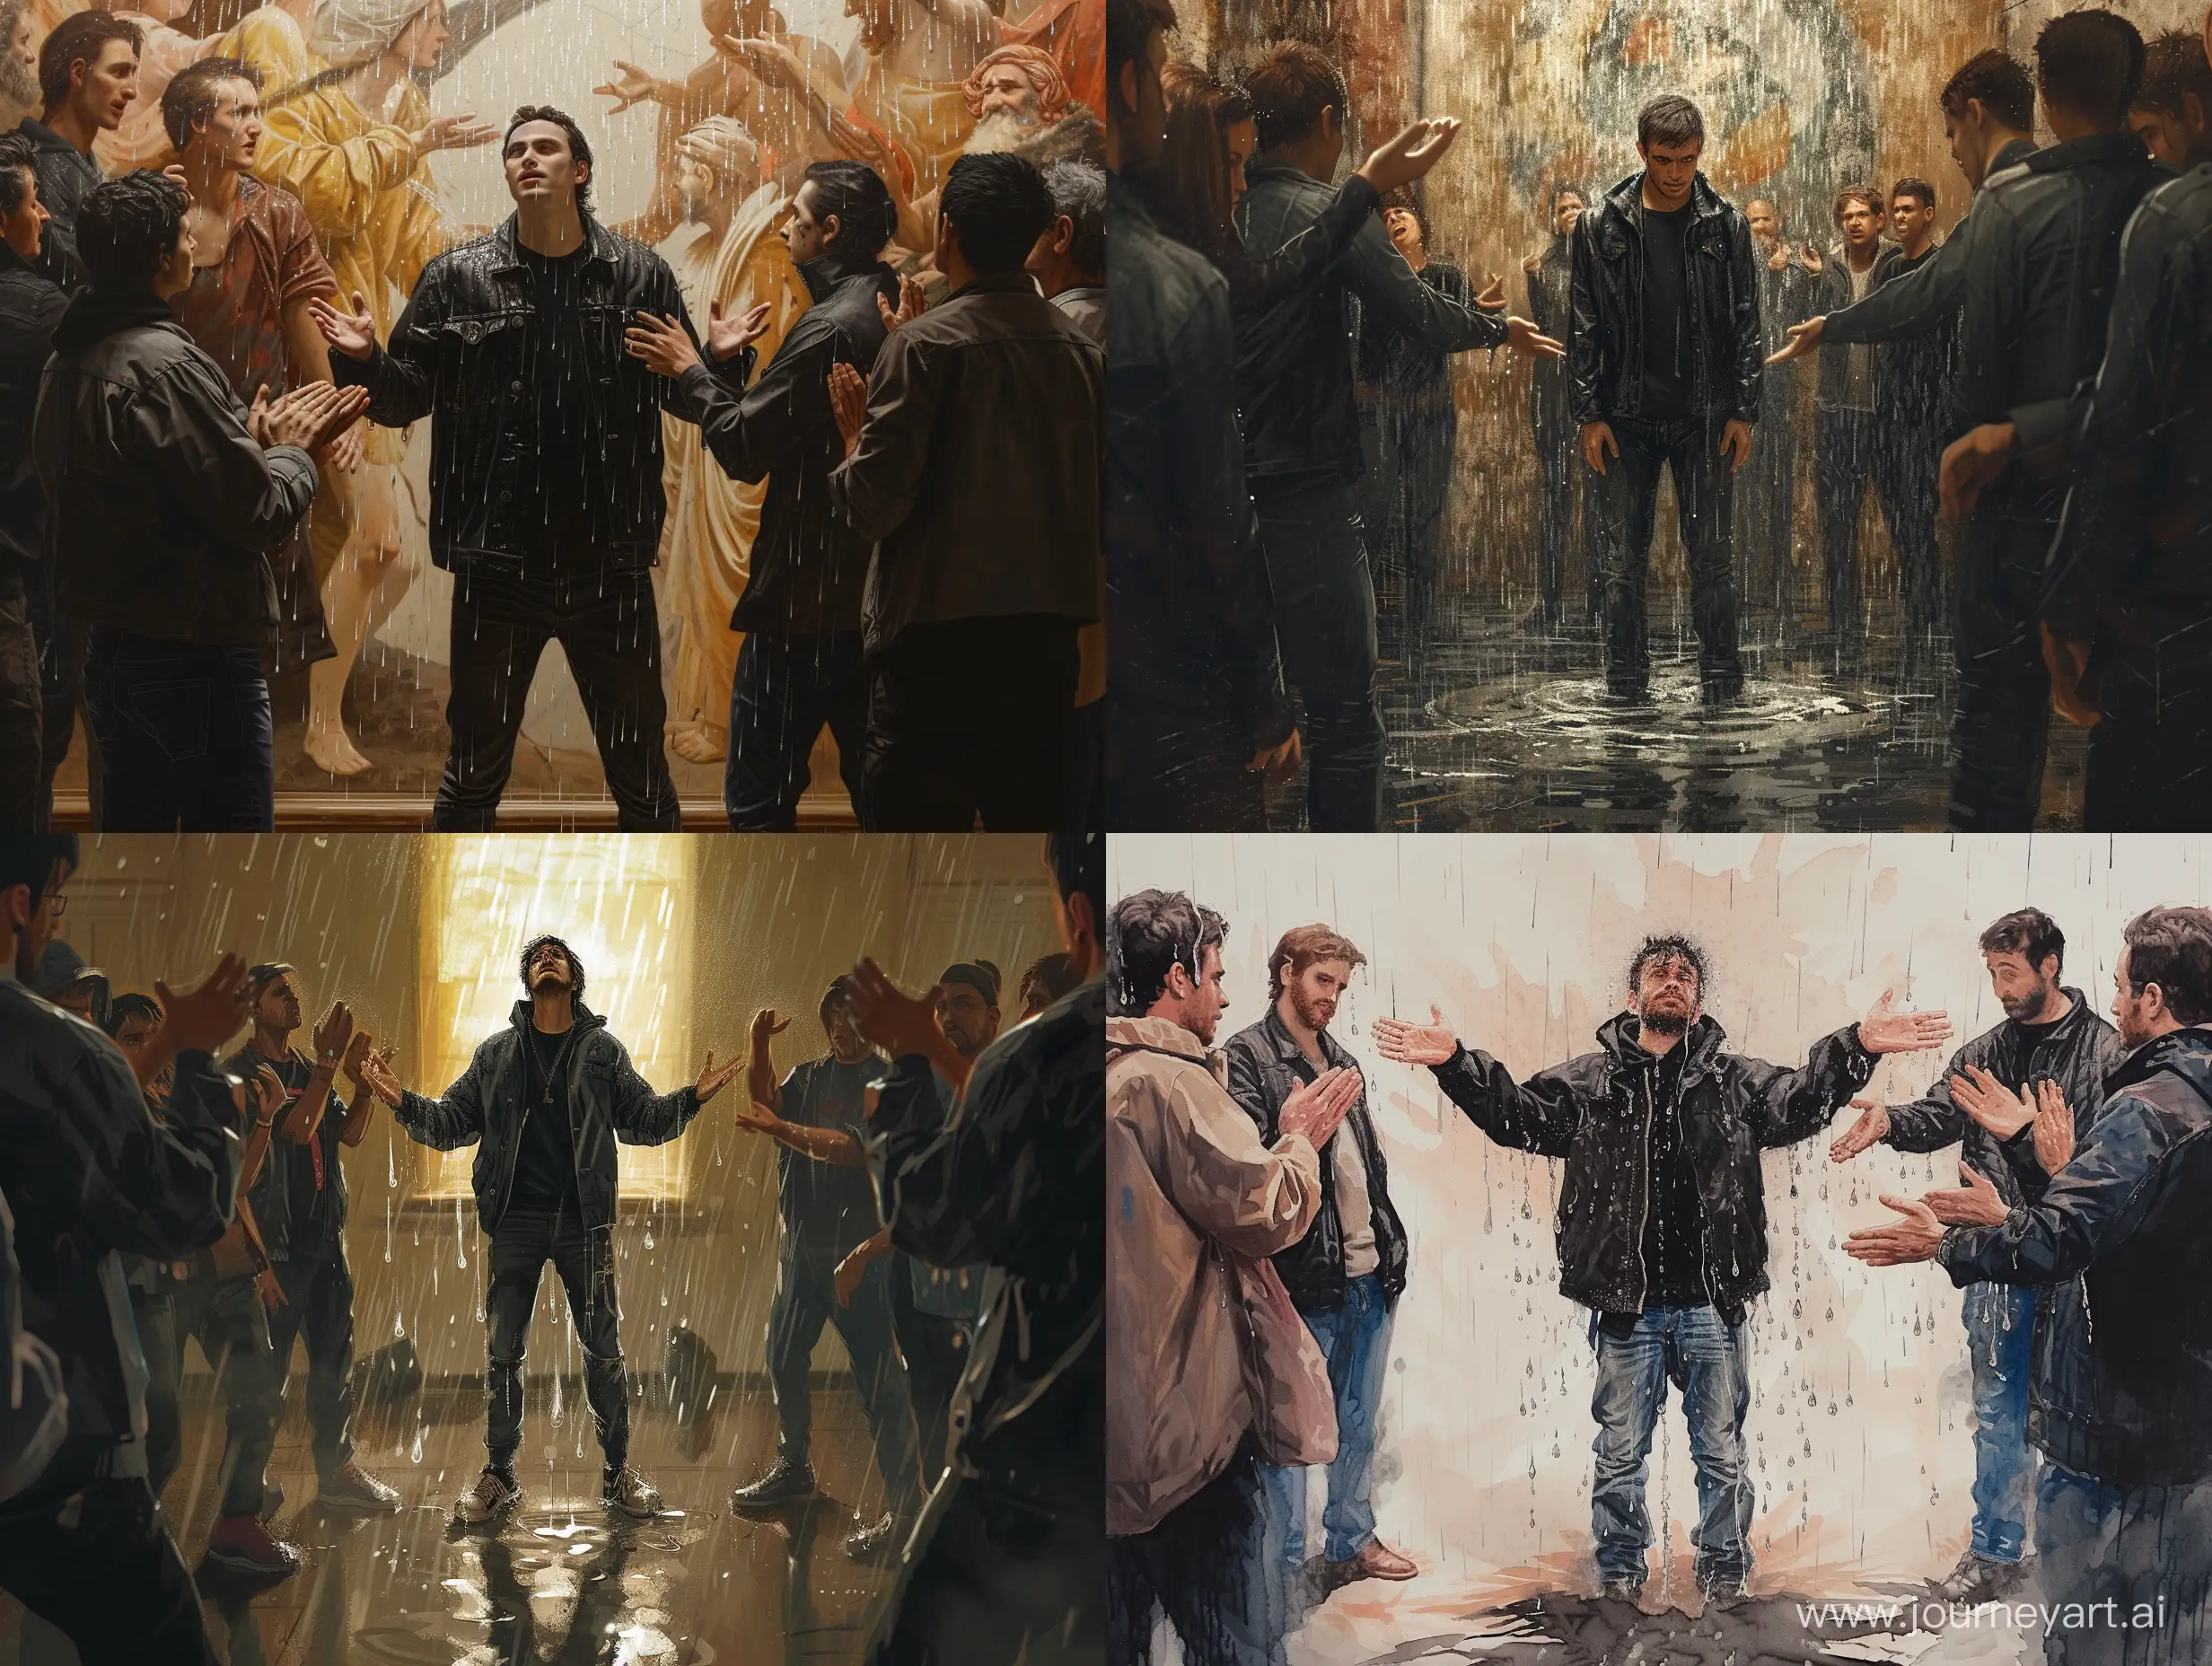 the man that makes rain standing in the middle with a black jacket and jeans, and others praising him, michelangelo artstyle